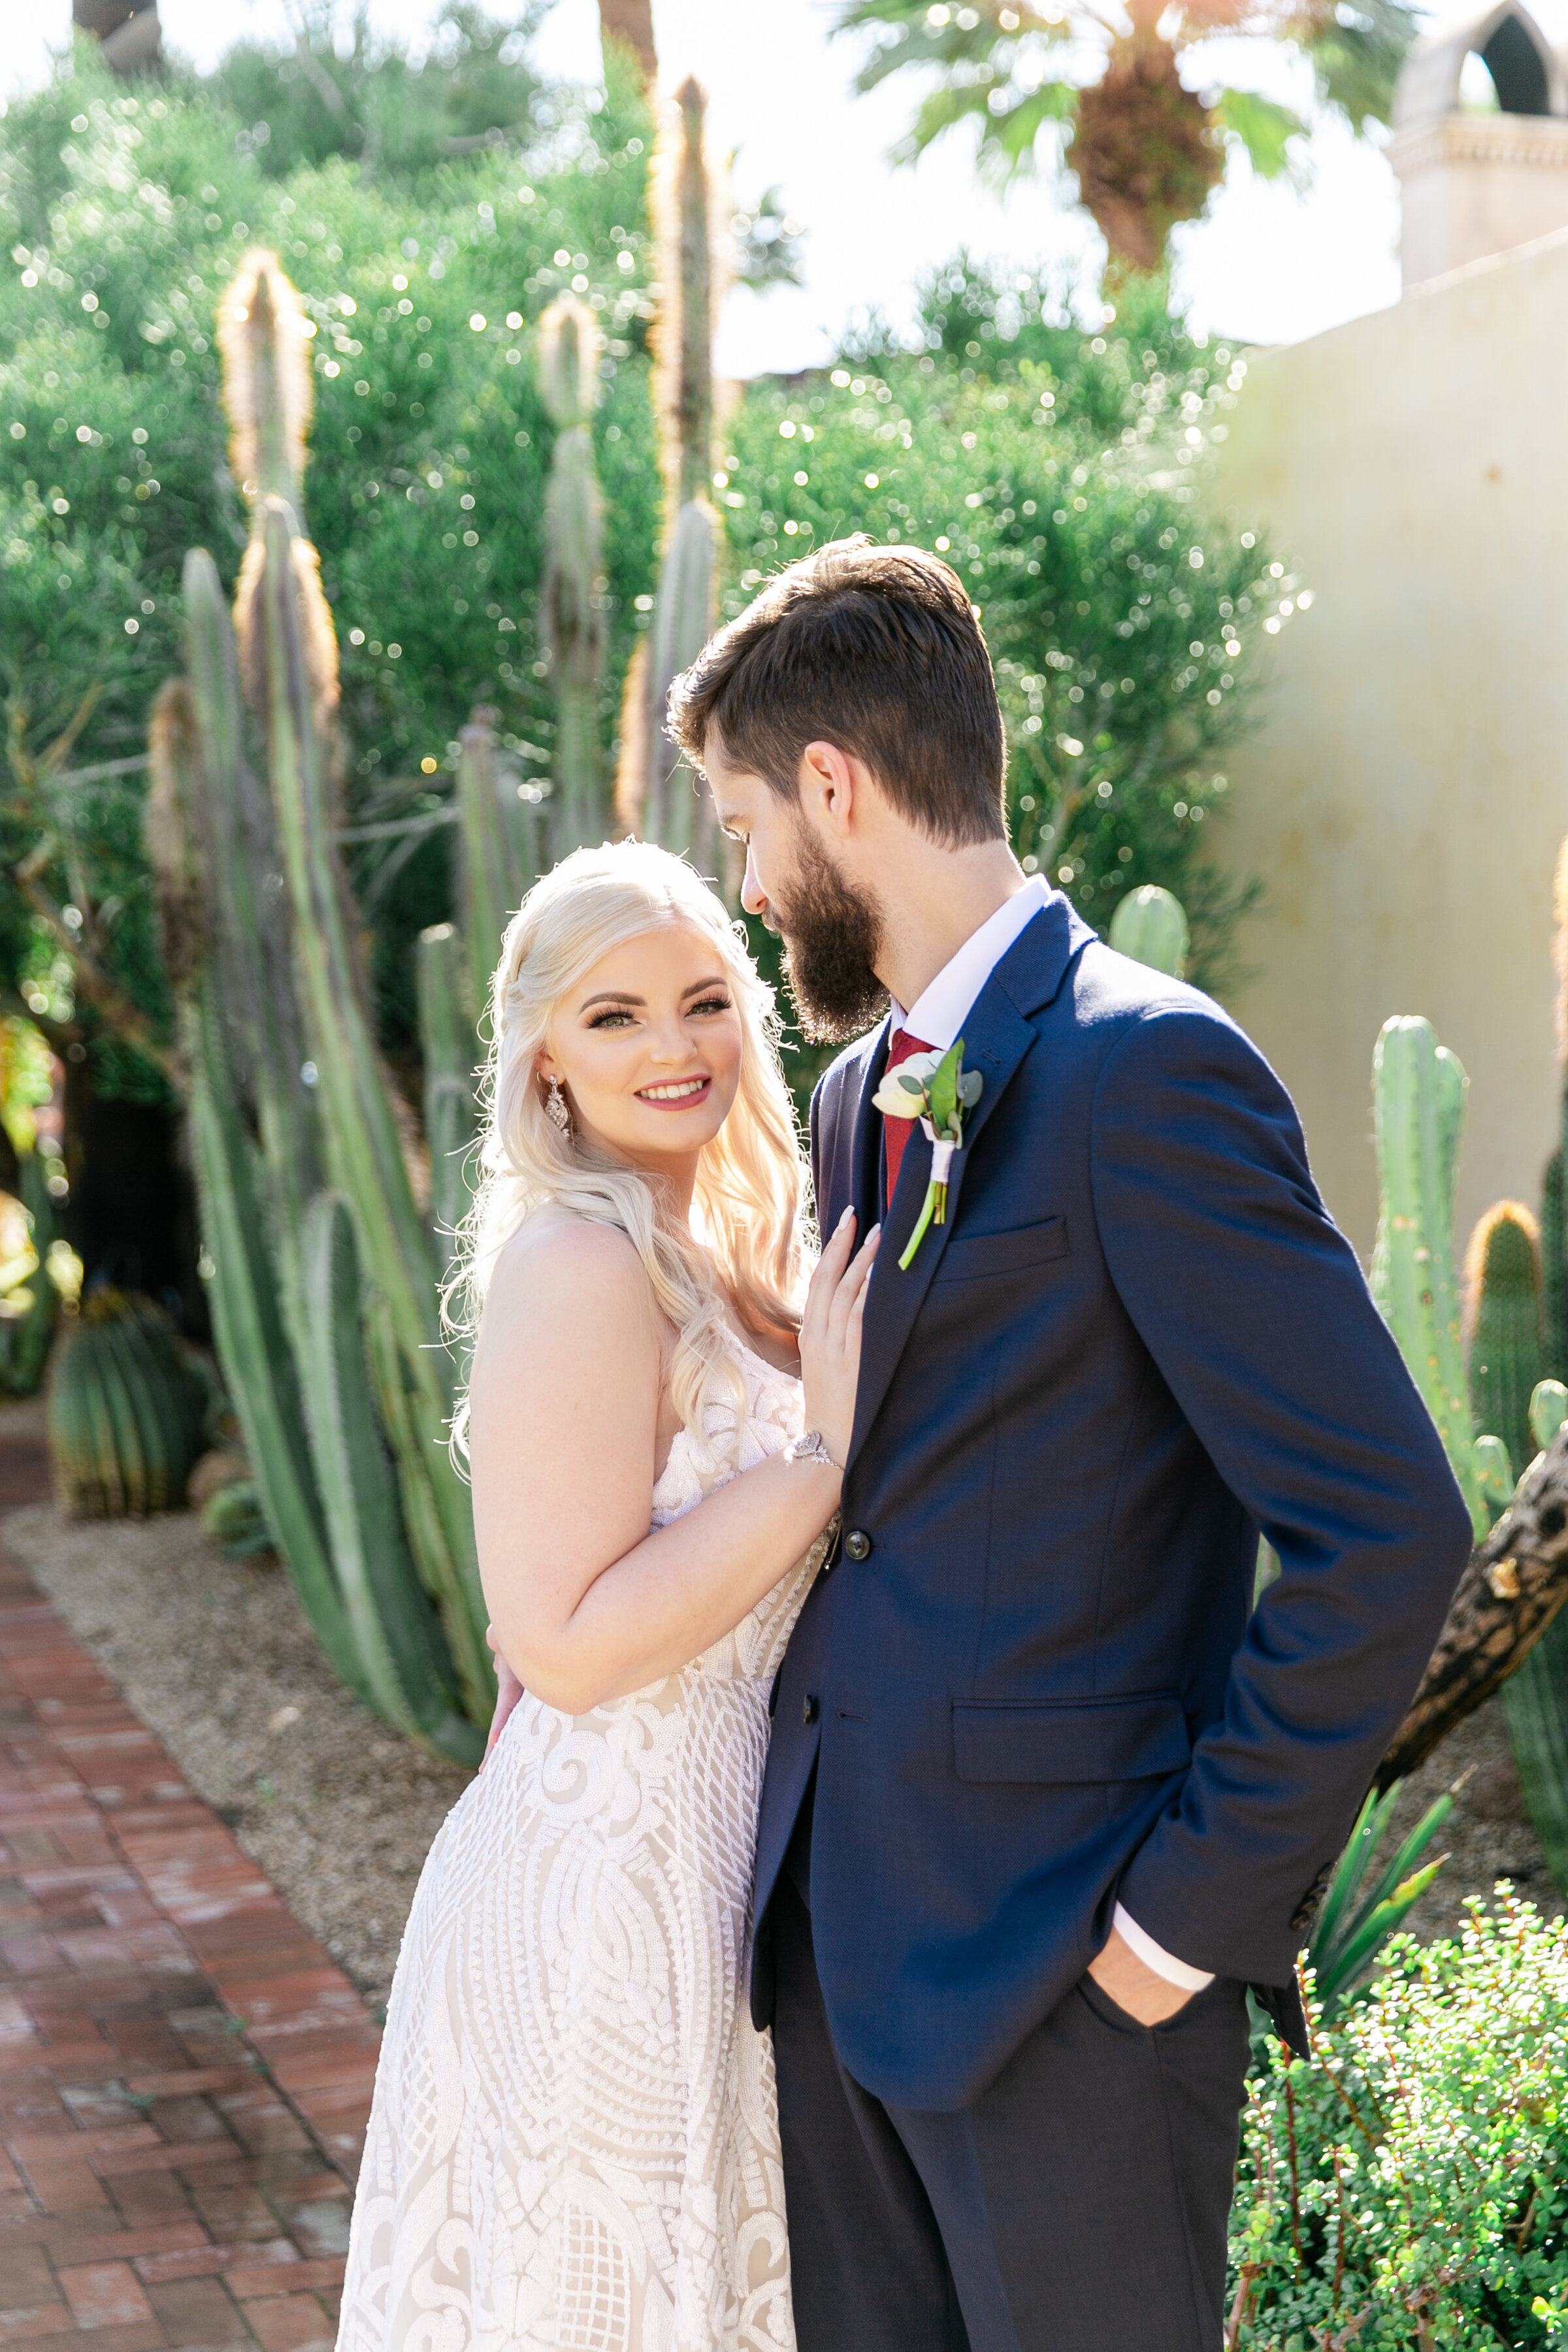 Karlie Colleen Photography - The Royal Palms Wedding - Some Like It Classic - Alex & Sam-151